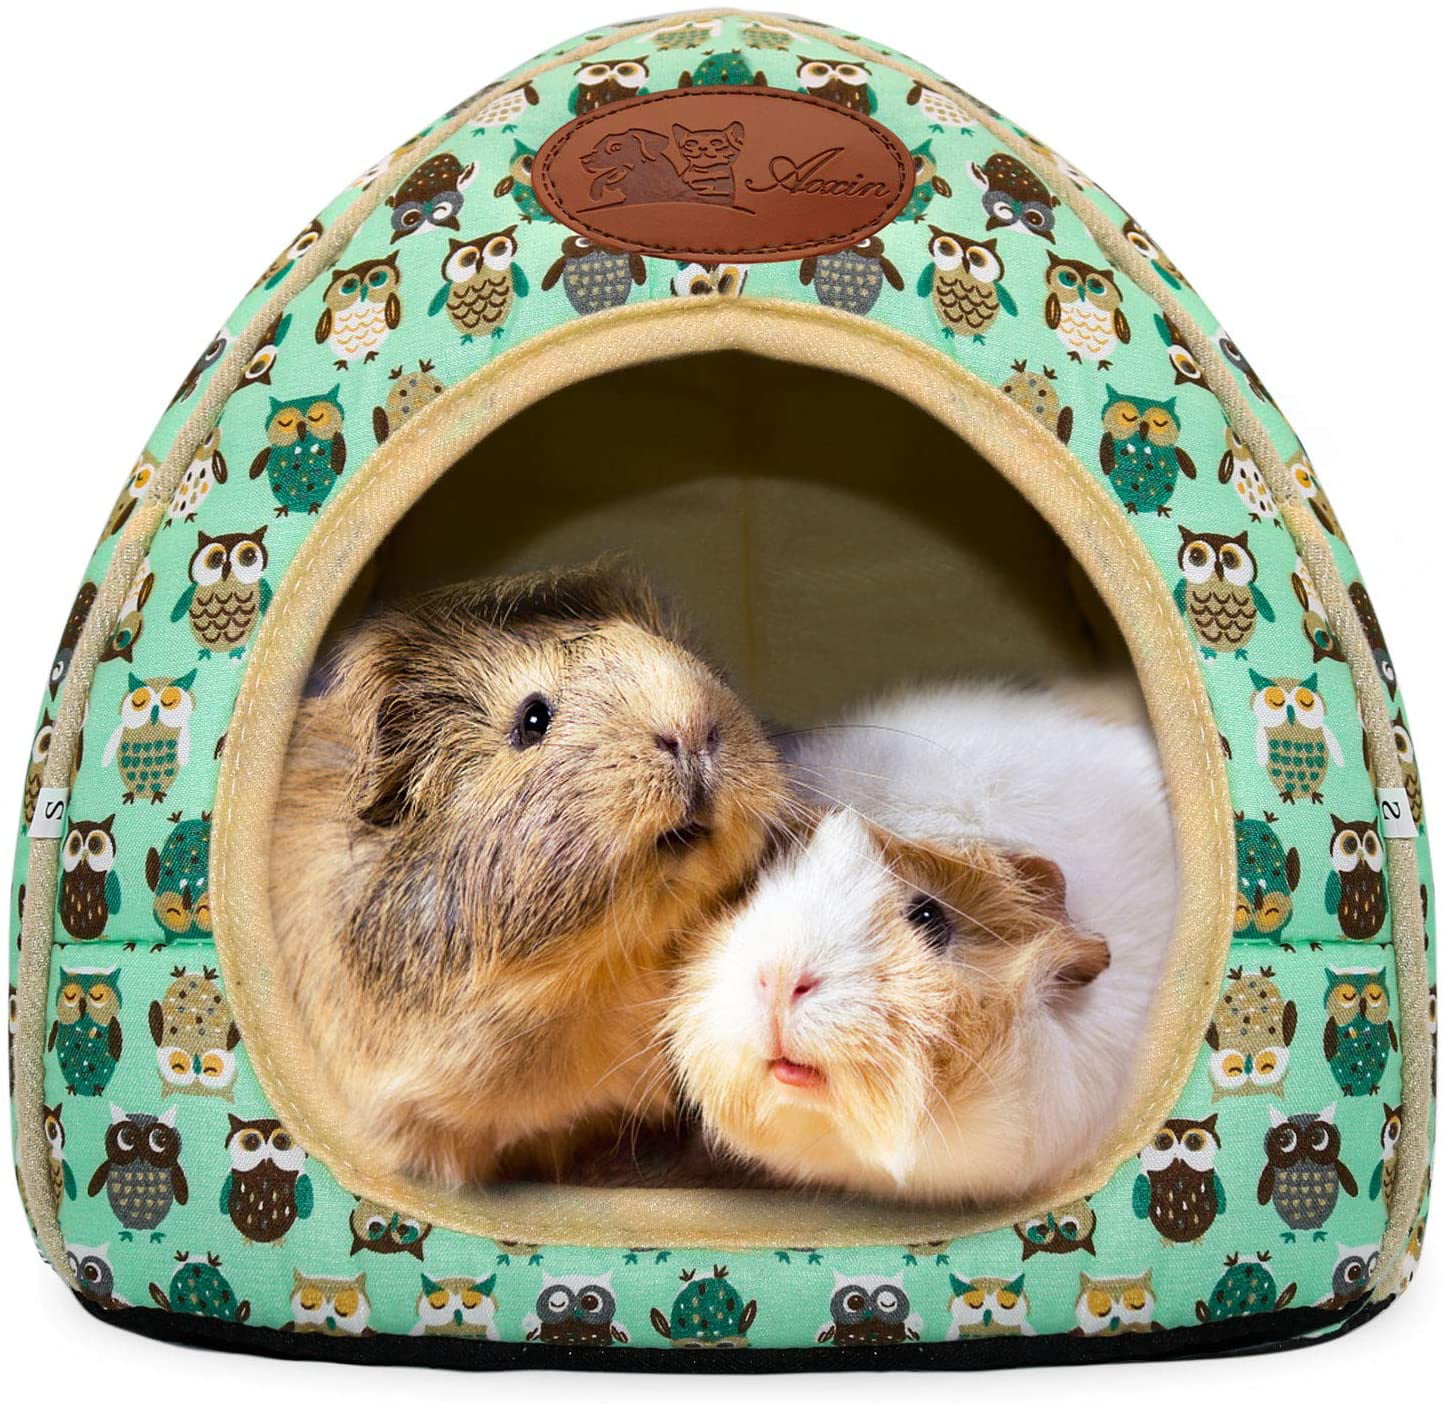 with 2 Washable Mats Little Rabbit Guinea Pig Hamster Hedgehog Hideout Accessories Small Animal House Cages Hammock Bed 